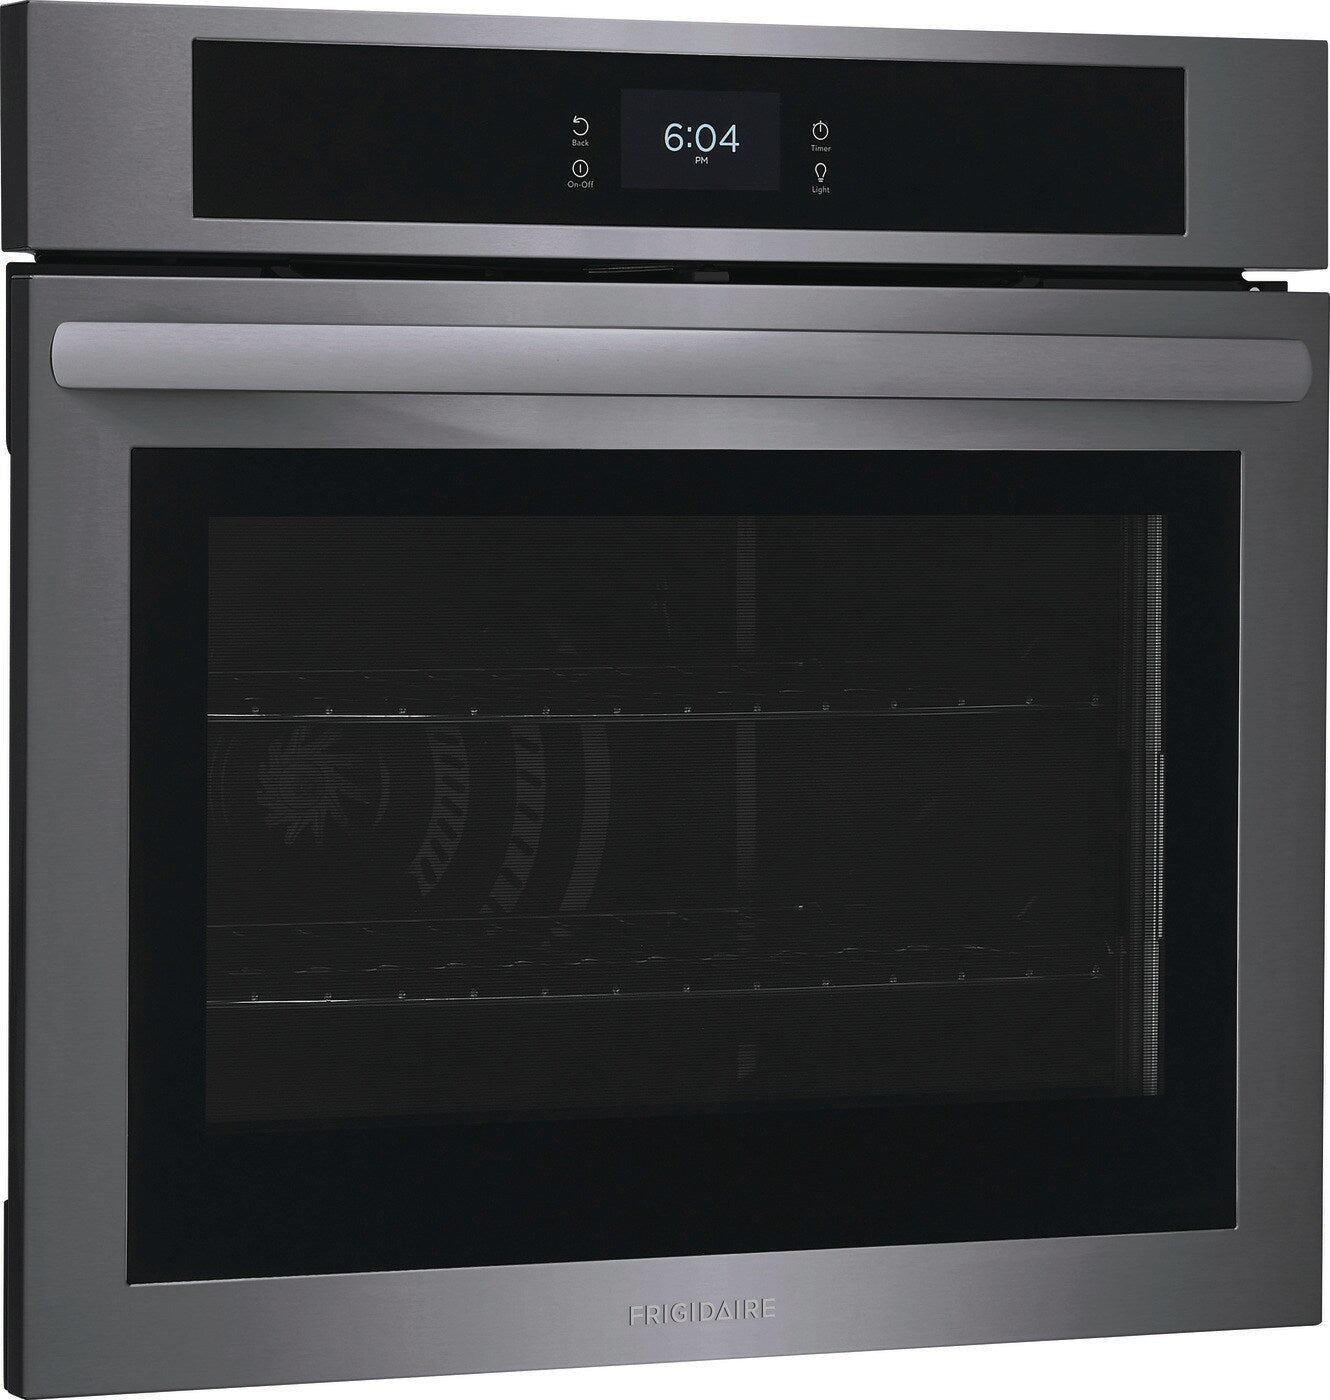 Frigidaire - 5.3 cu. ft Single Wall Oven in Black Stainless - FCWS3027AD